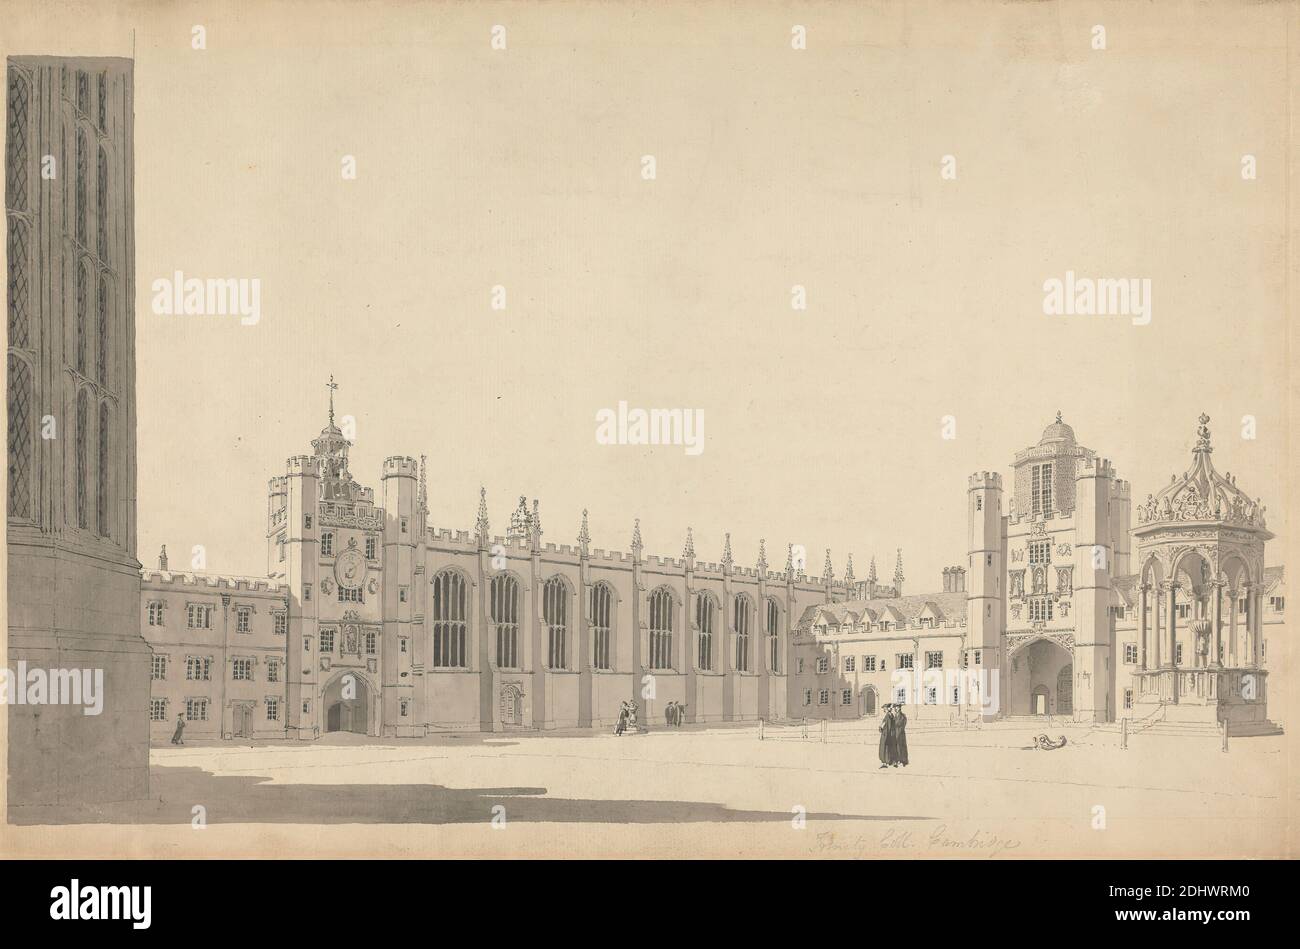 The Great Court, Trinity College, Cambridge, Michael 'Angelo' Rooker, 1746–1801, British, undated, Black ink and gray wash on moderately thick, slightly textured, cream laid paper, Sheet: 12 x 18 inches (30.5 x 45.7 cm), architectural subject, court, fountain, genre subject, professors, scholars, university, Cambridge, Cambridgeshire, England, Trinity College, Cambridge, Trinity Great Court, United Kingdom, University of Cambridge Stock Photo